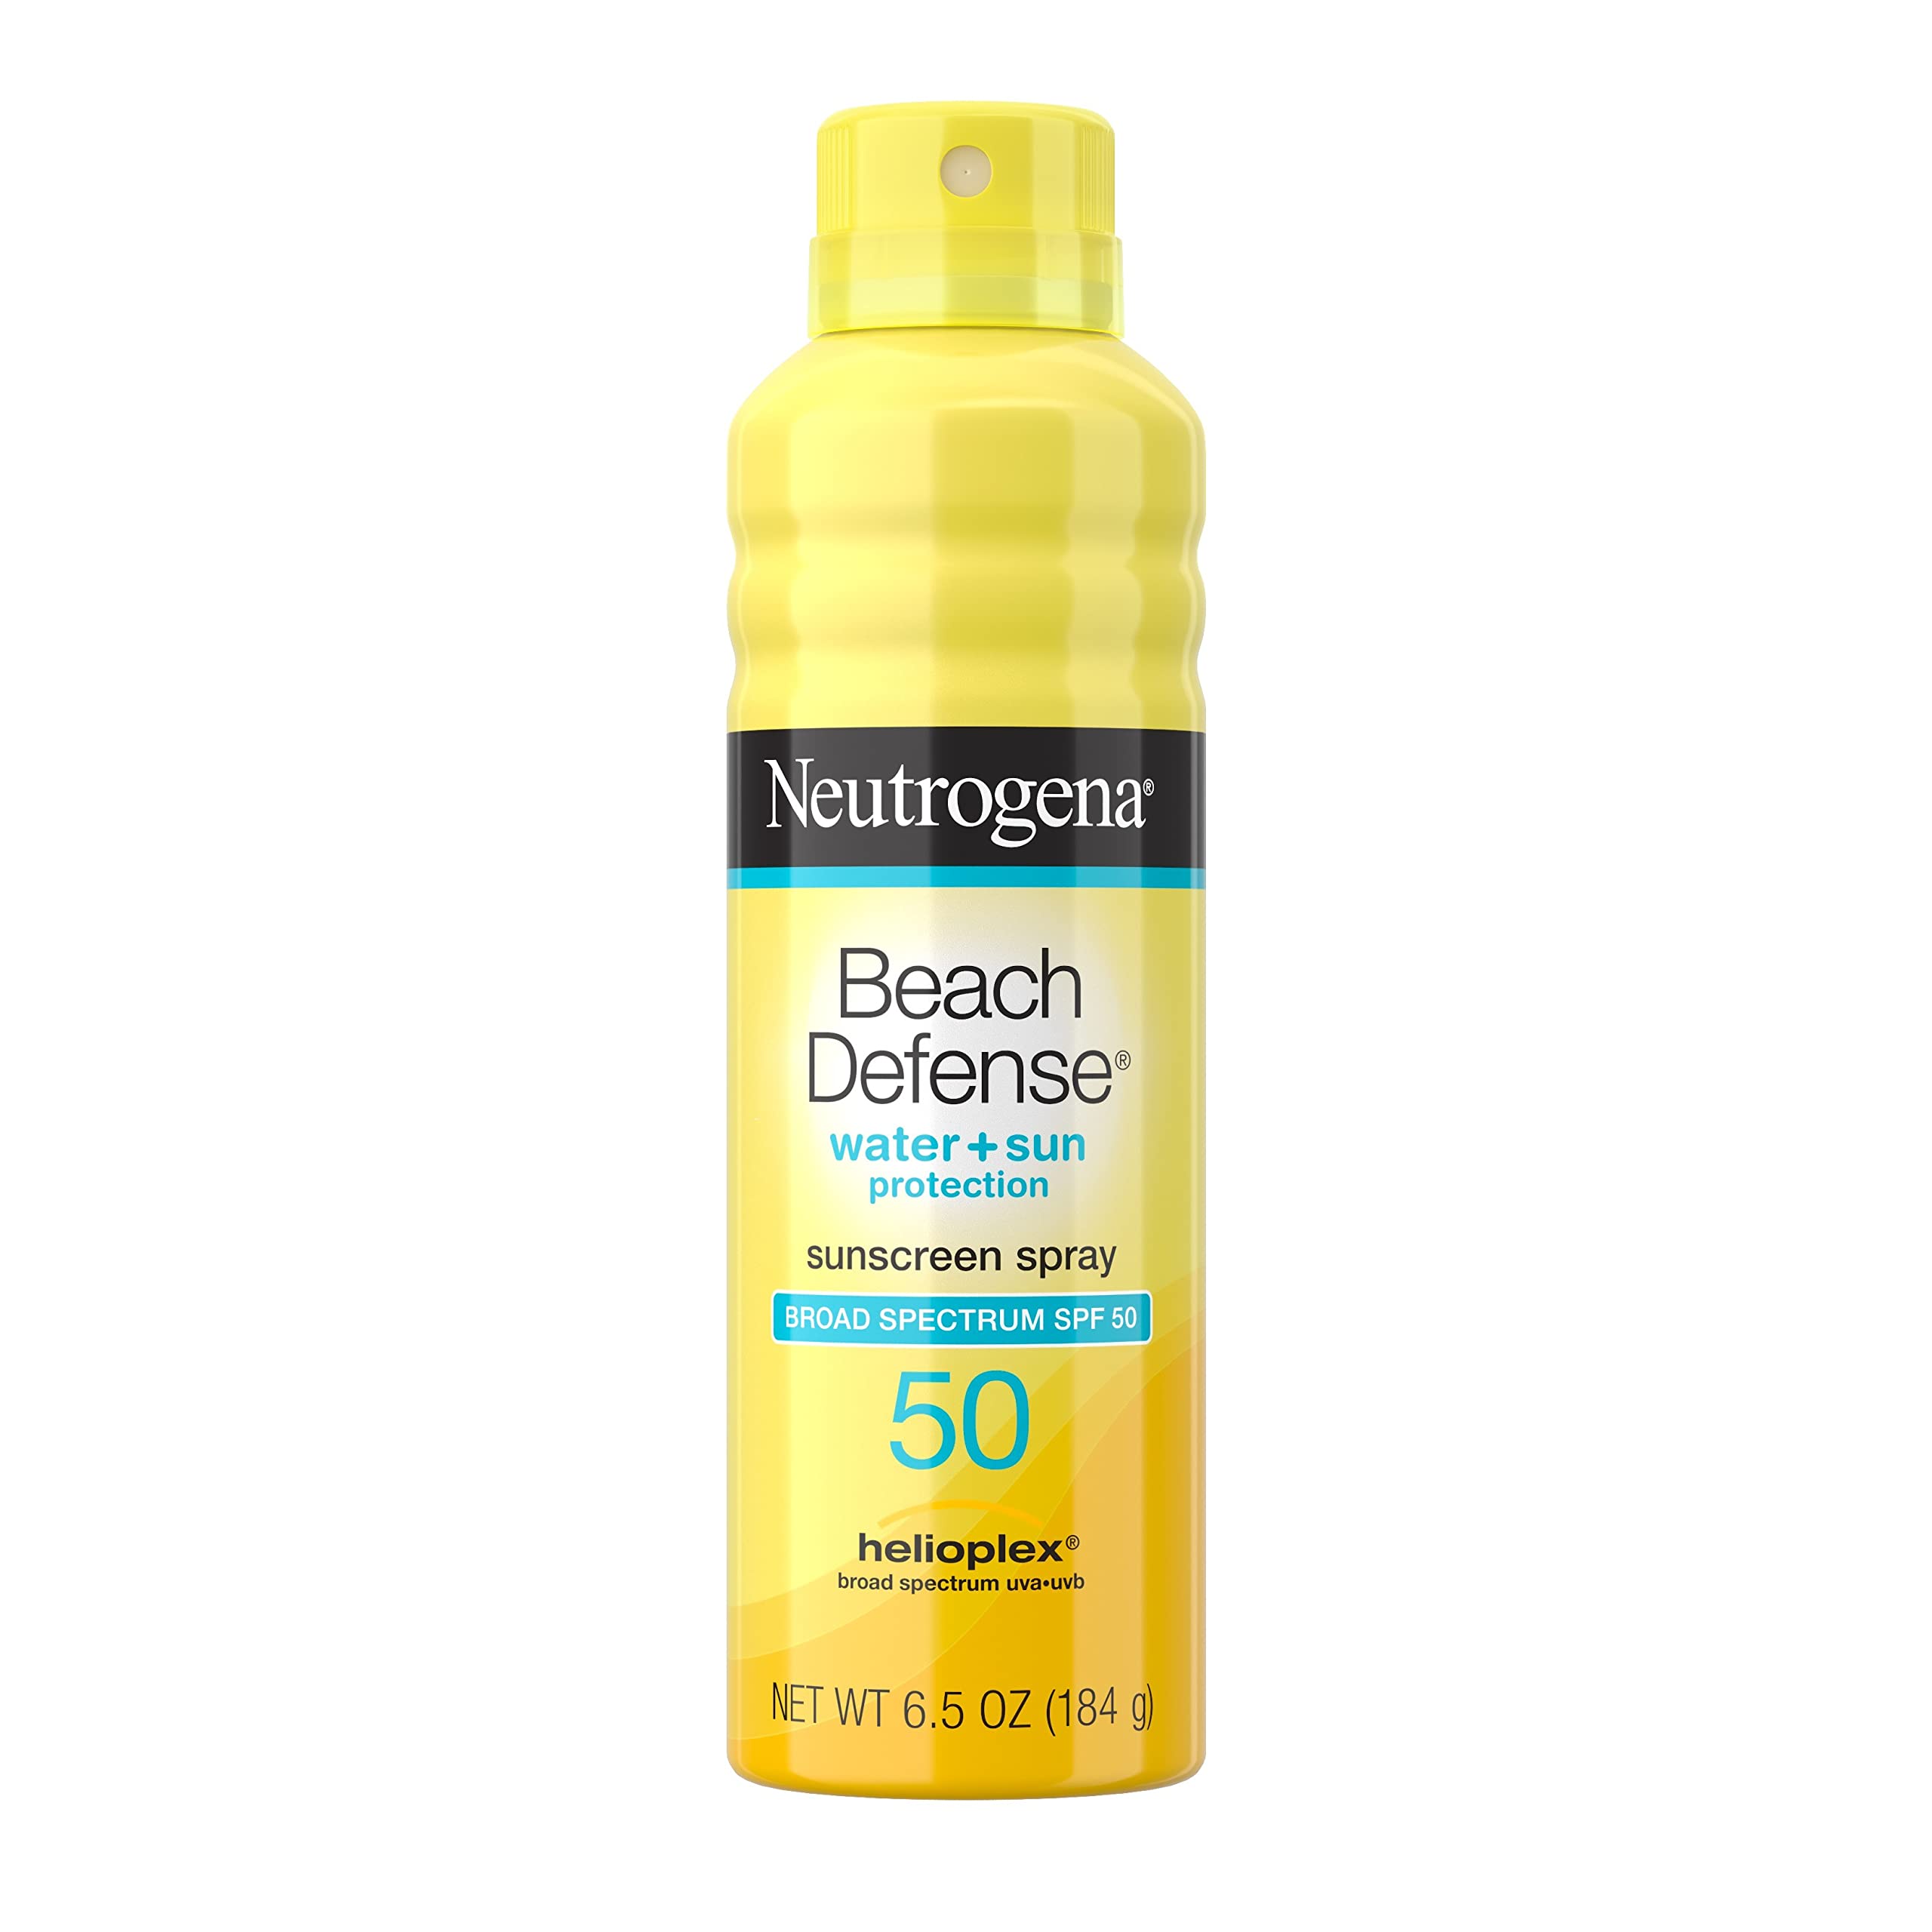 Neutrogena Beach Defense Sunscreen Spray SPF 50 Water-Resistant Sunscreen Body Spray with Broad Spectrum SPF 50, PABA-Free, Oxybenzone-Free & Fast-Drying, Superior Sun Protection, 6.5 oz